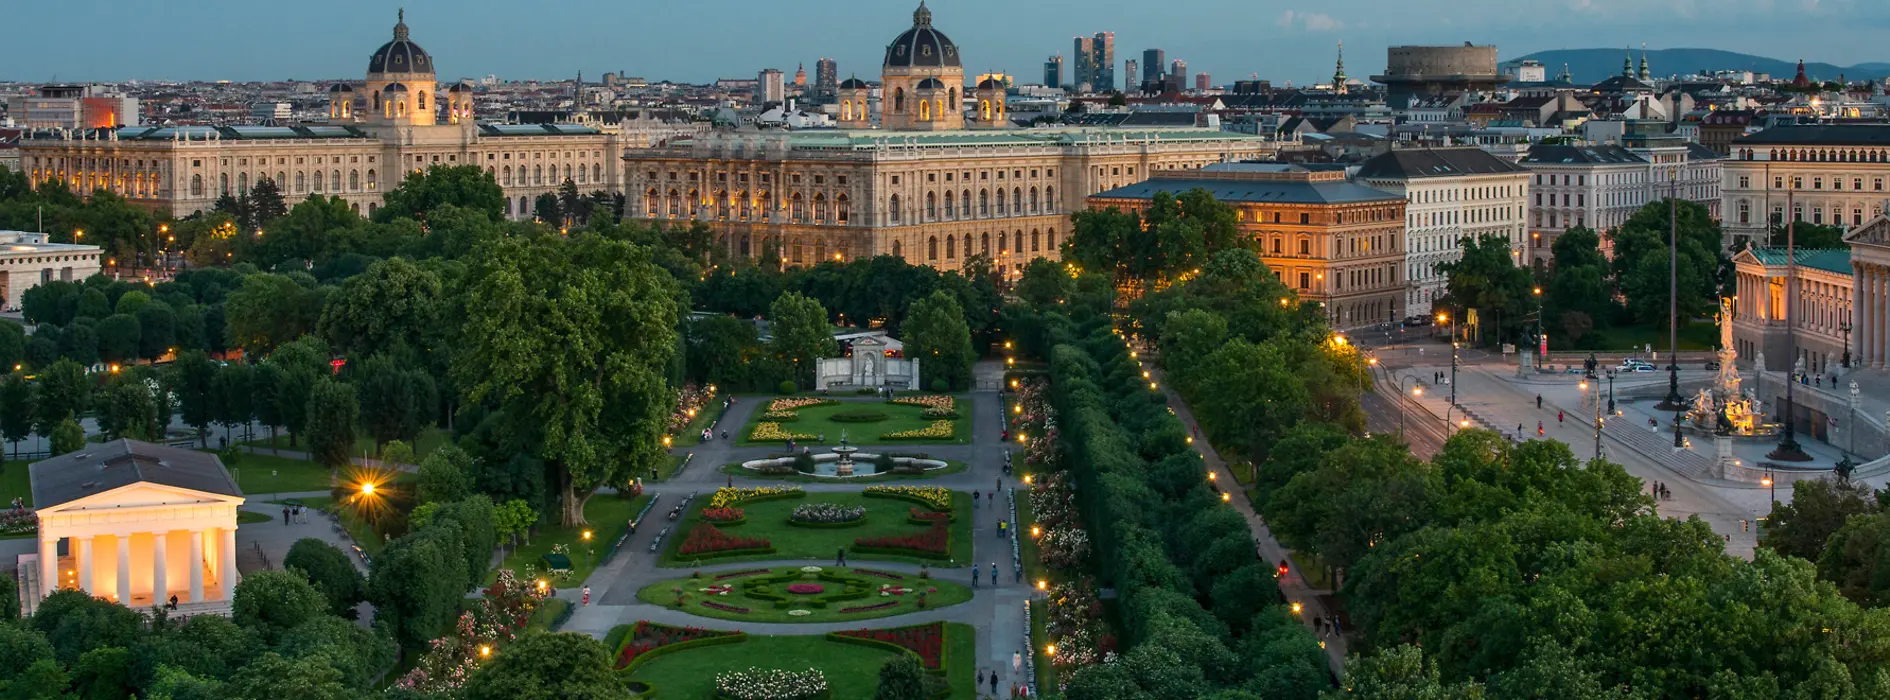 The Ringstrasse in the twilight, view of Parliament